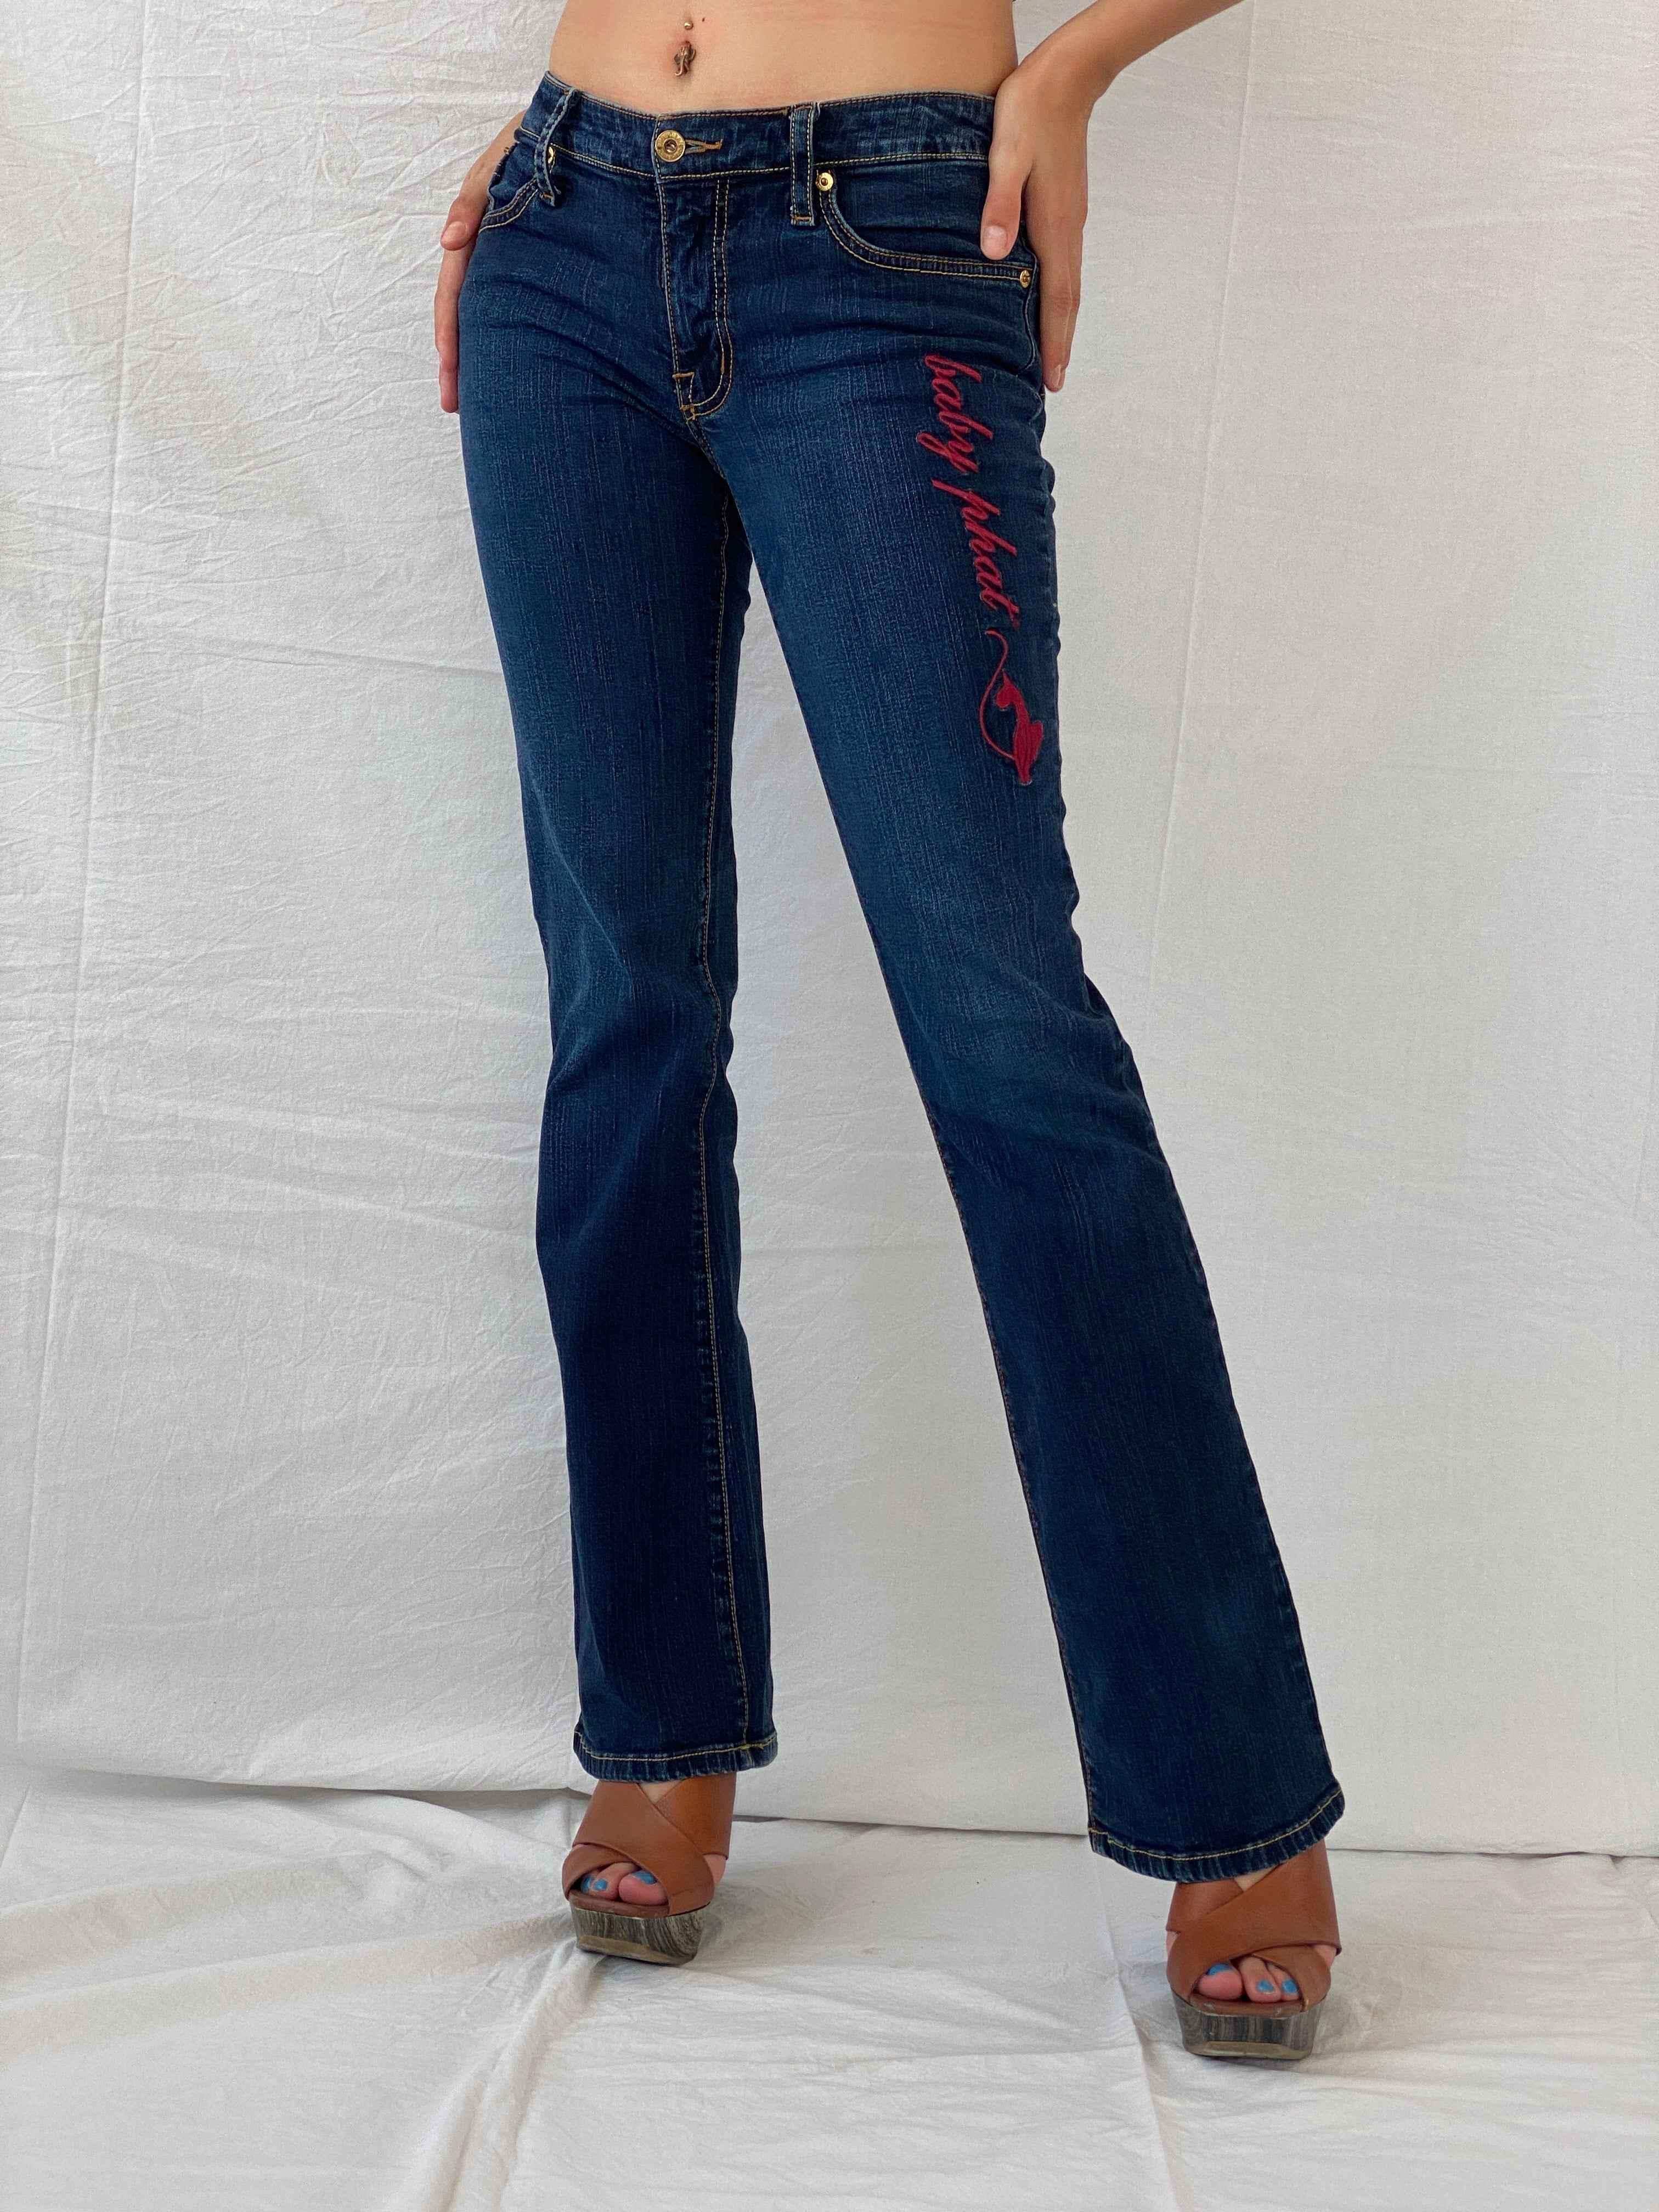 Y2K Baby Phat low waist jeans- Fits Size 36EUR